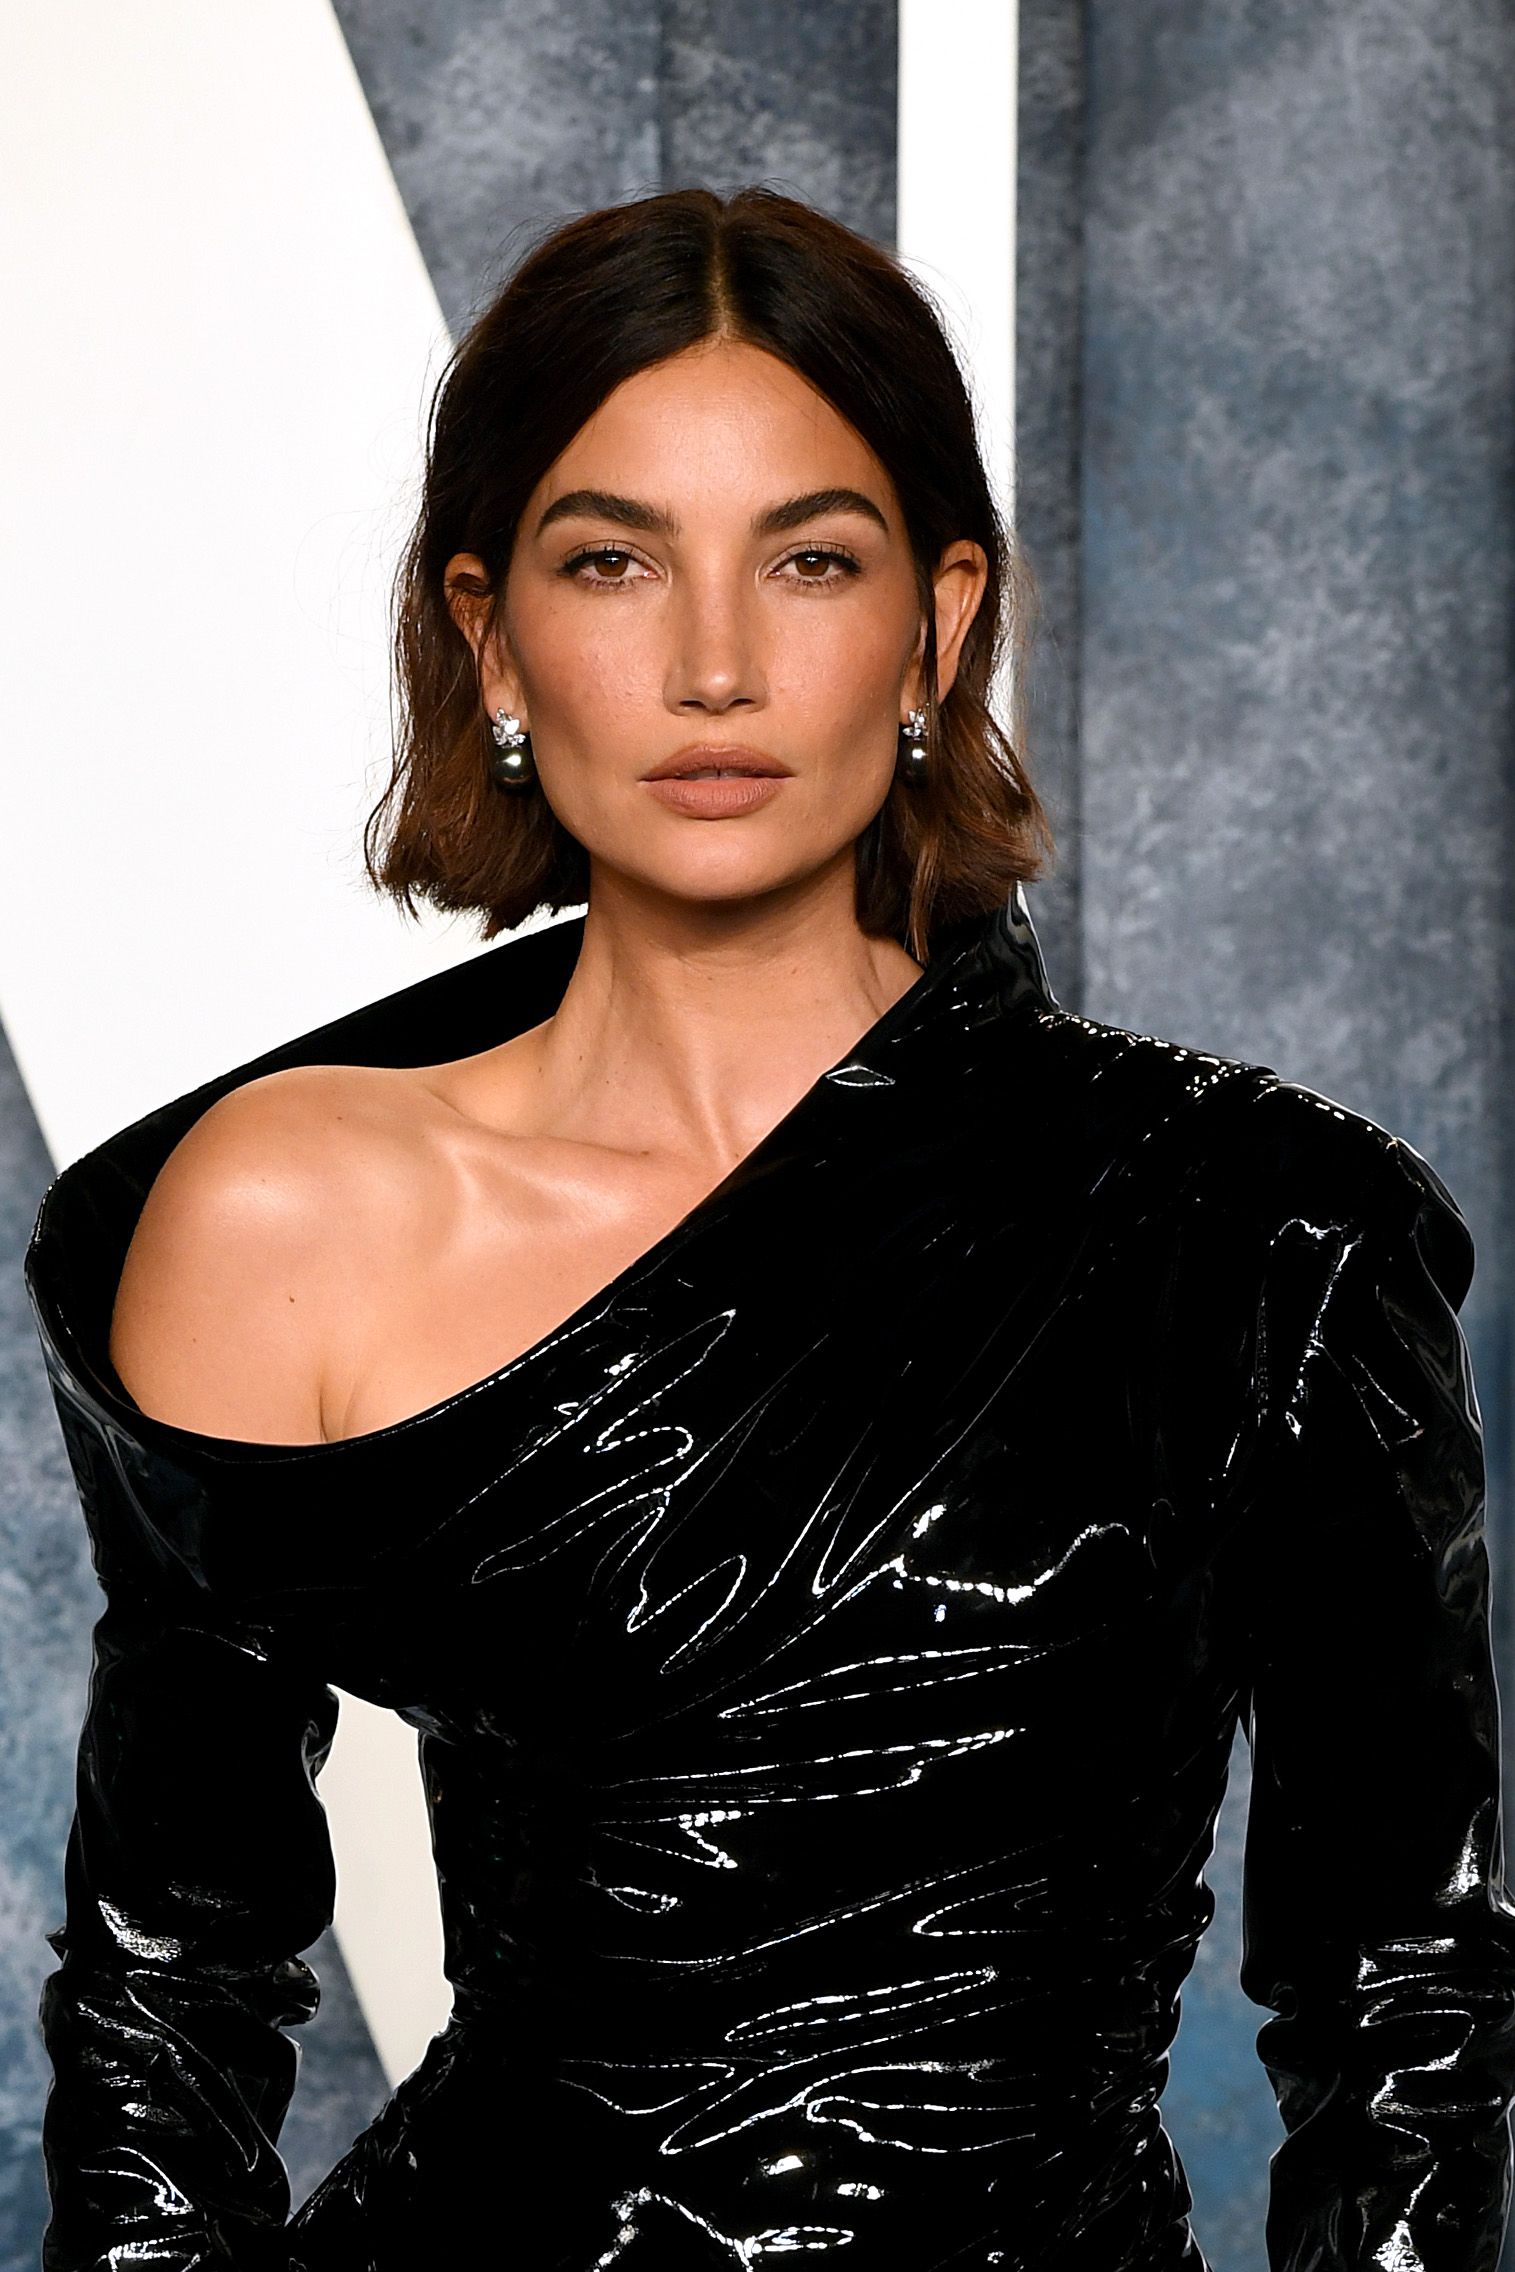 Lily Aldridge debuted a textured boyfriend bob at the Oscars after party